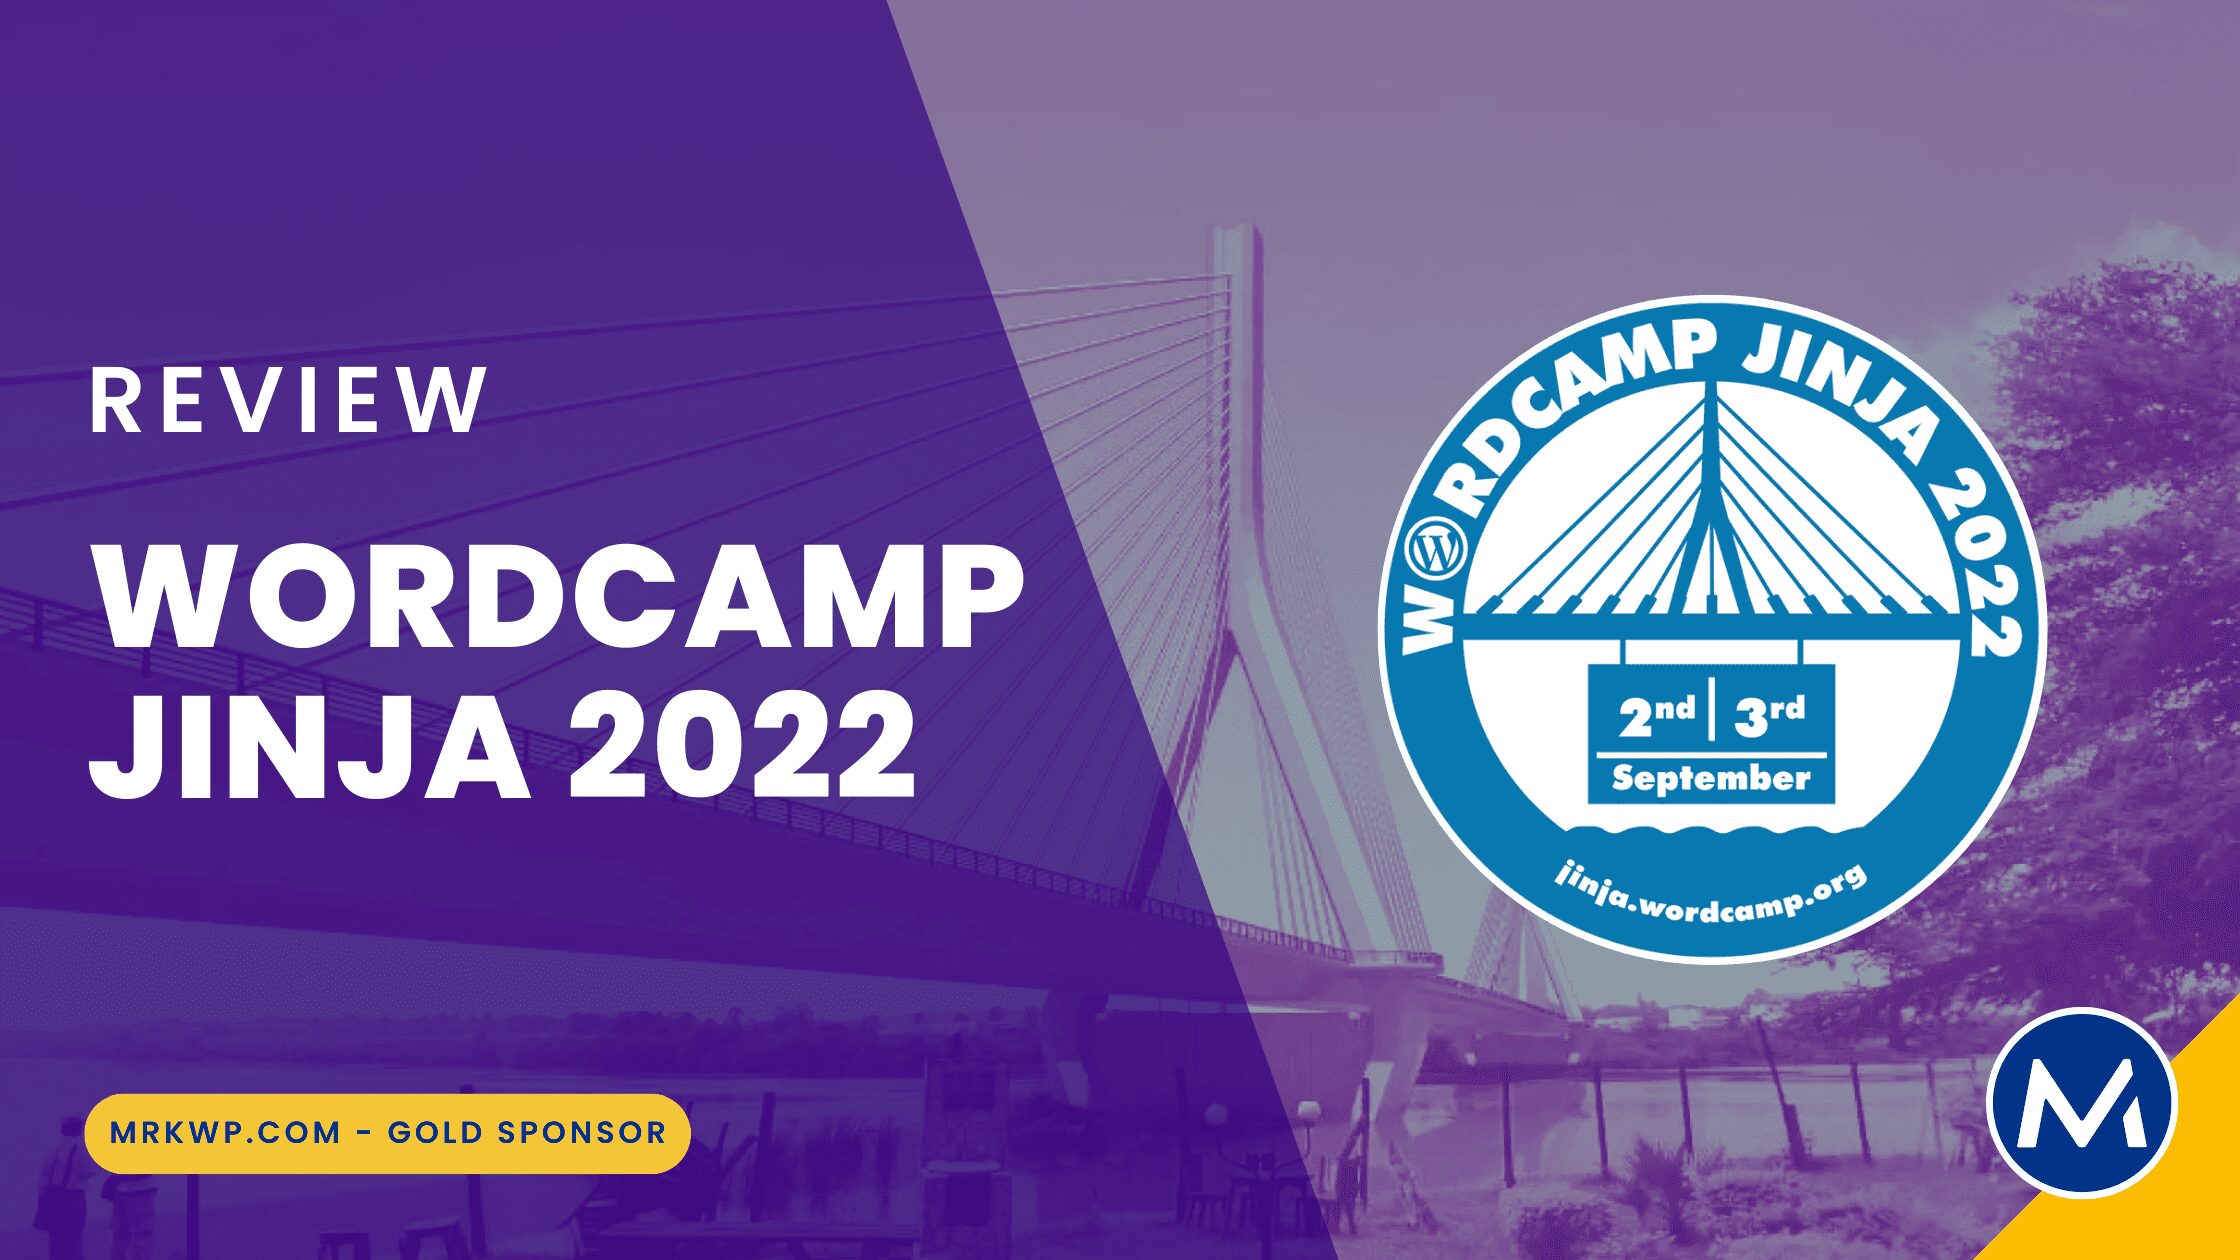 Review of the WordCamp Jinja 2022 featured image